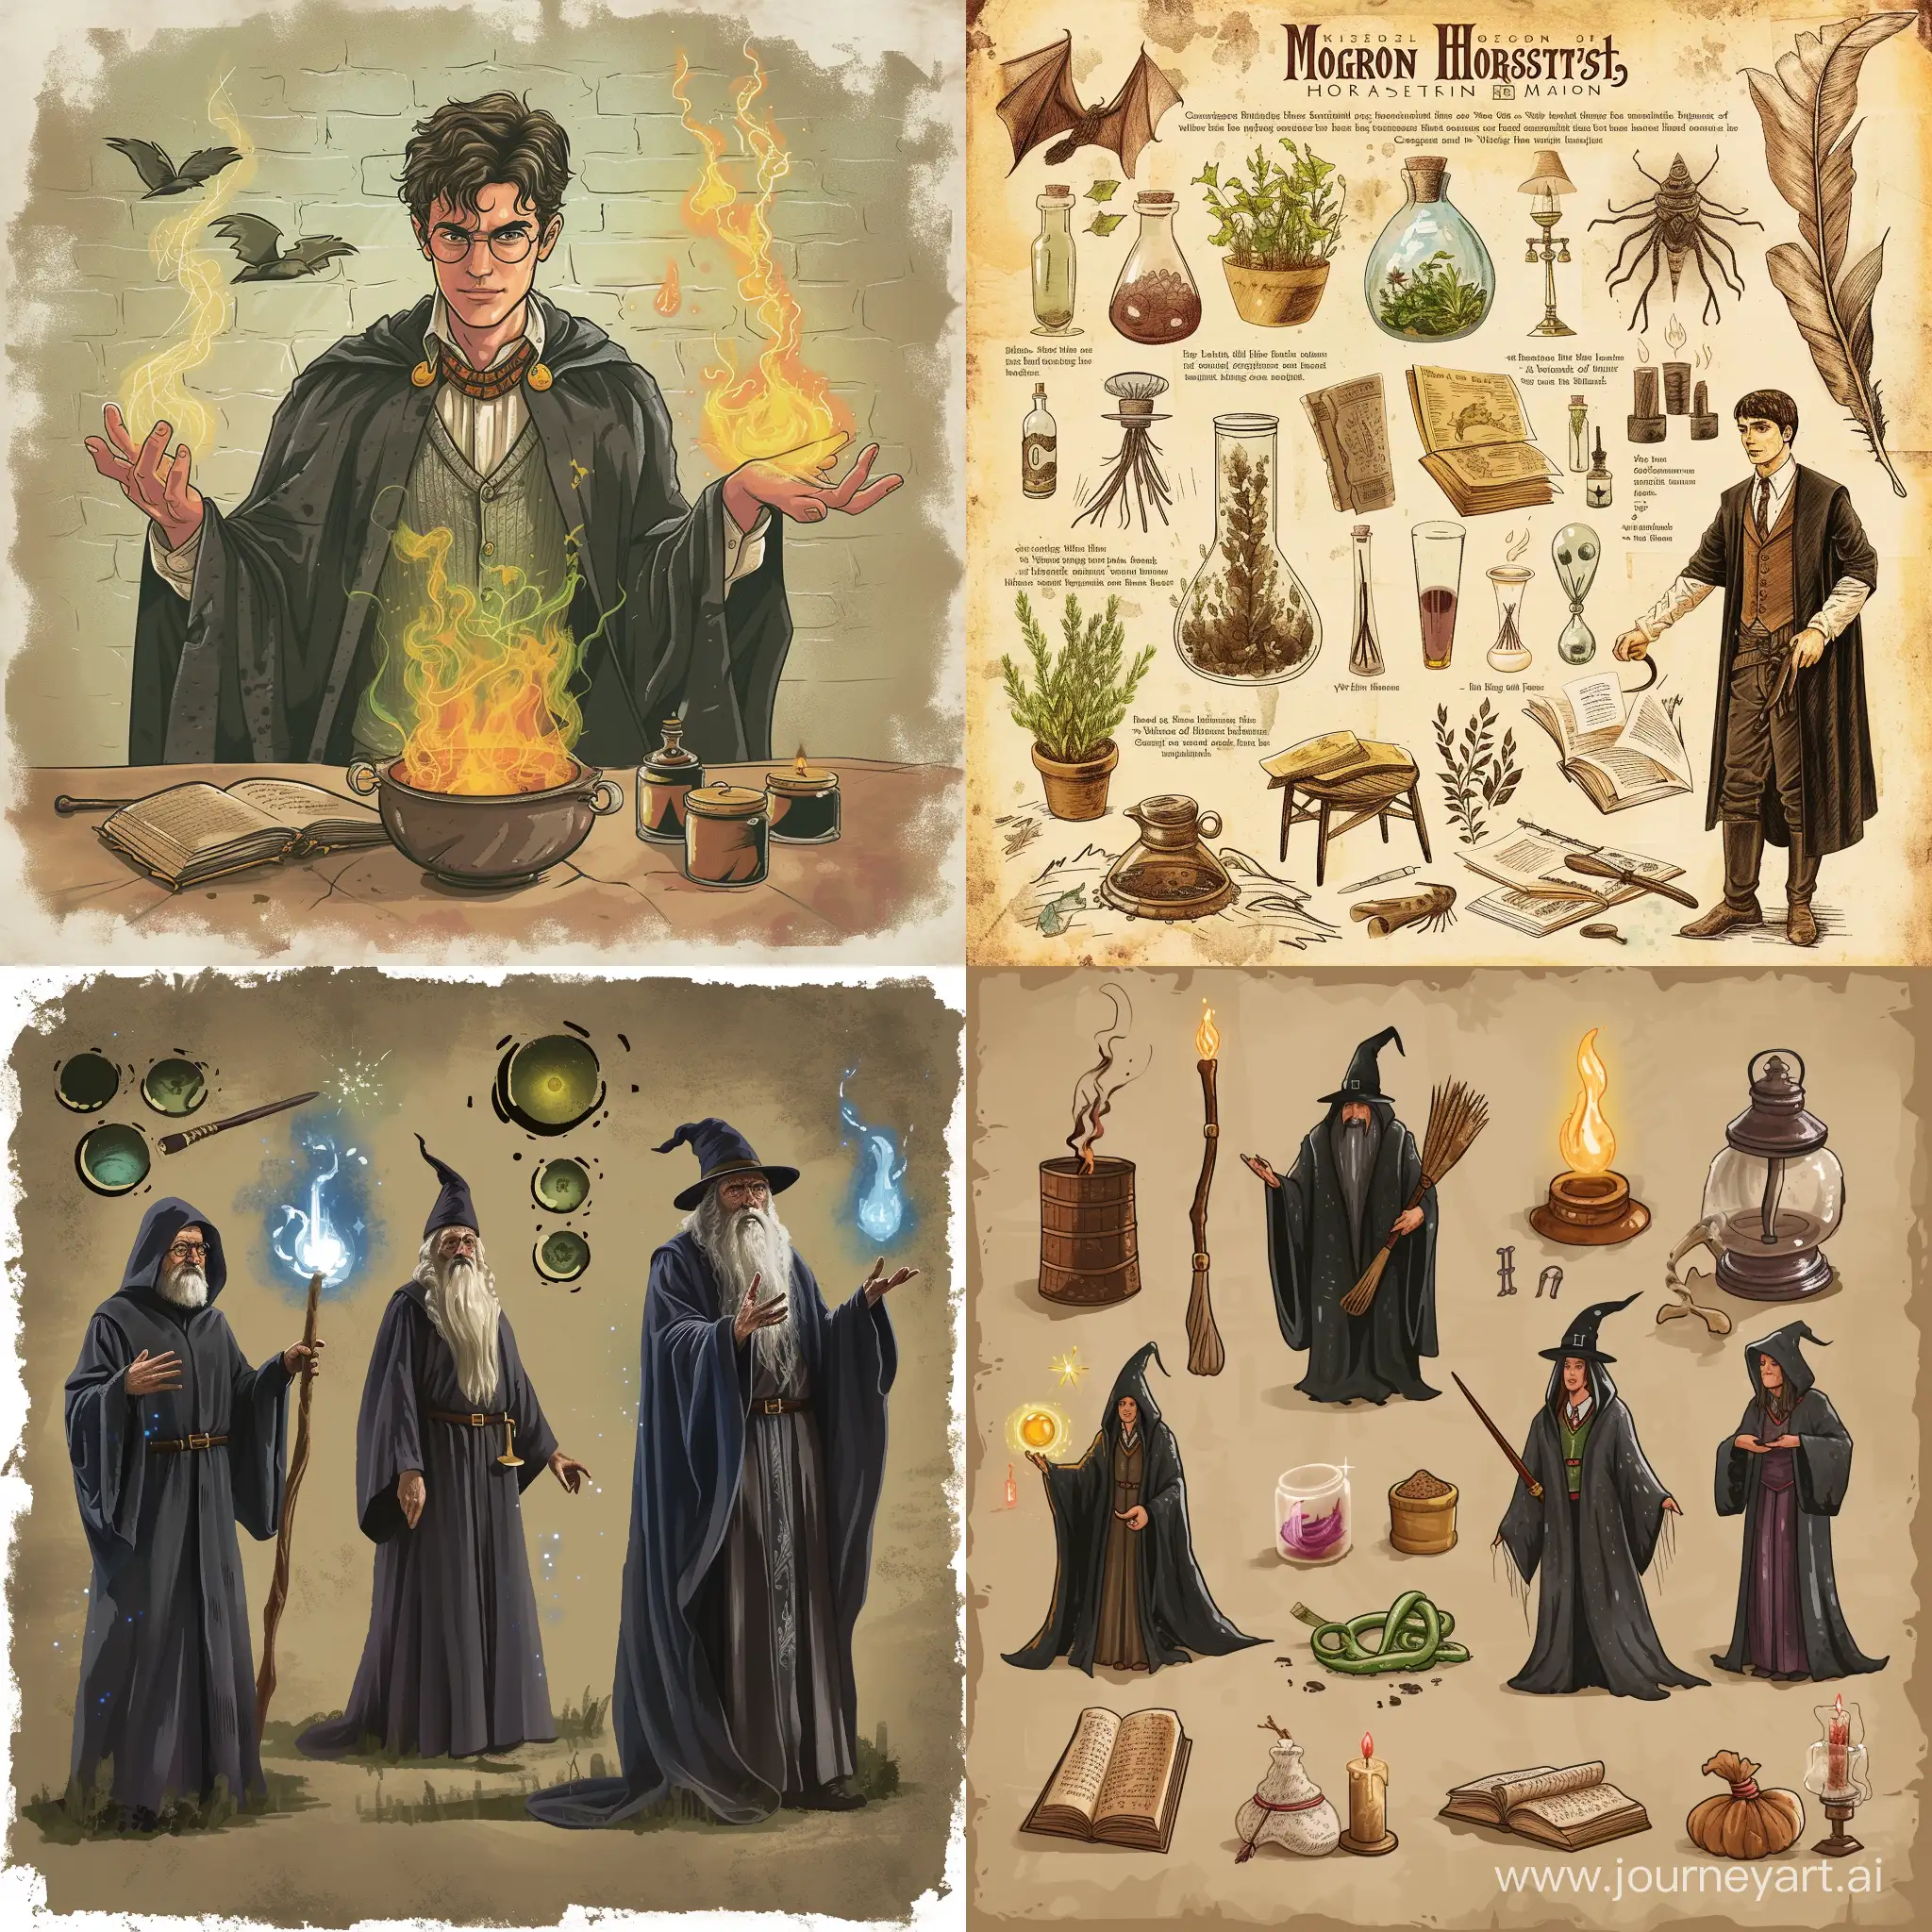 Diverse-Characters-Experiencing-Magic-at-Hogwarts-in-a-Square-Composition